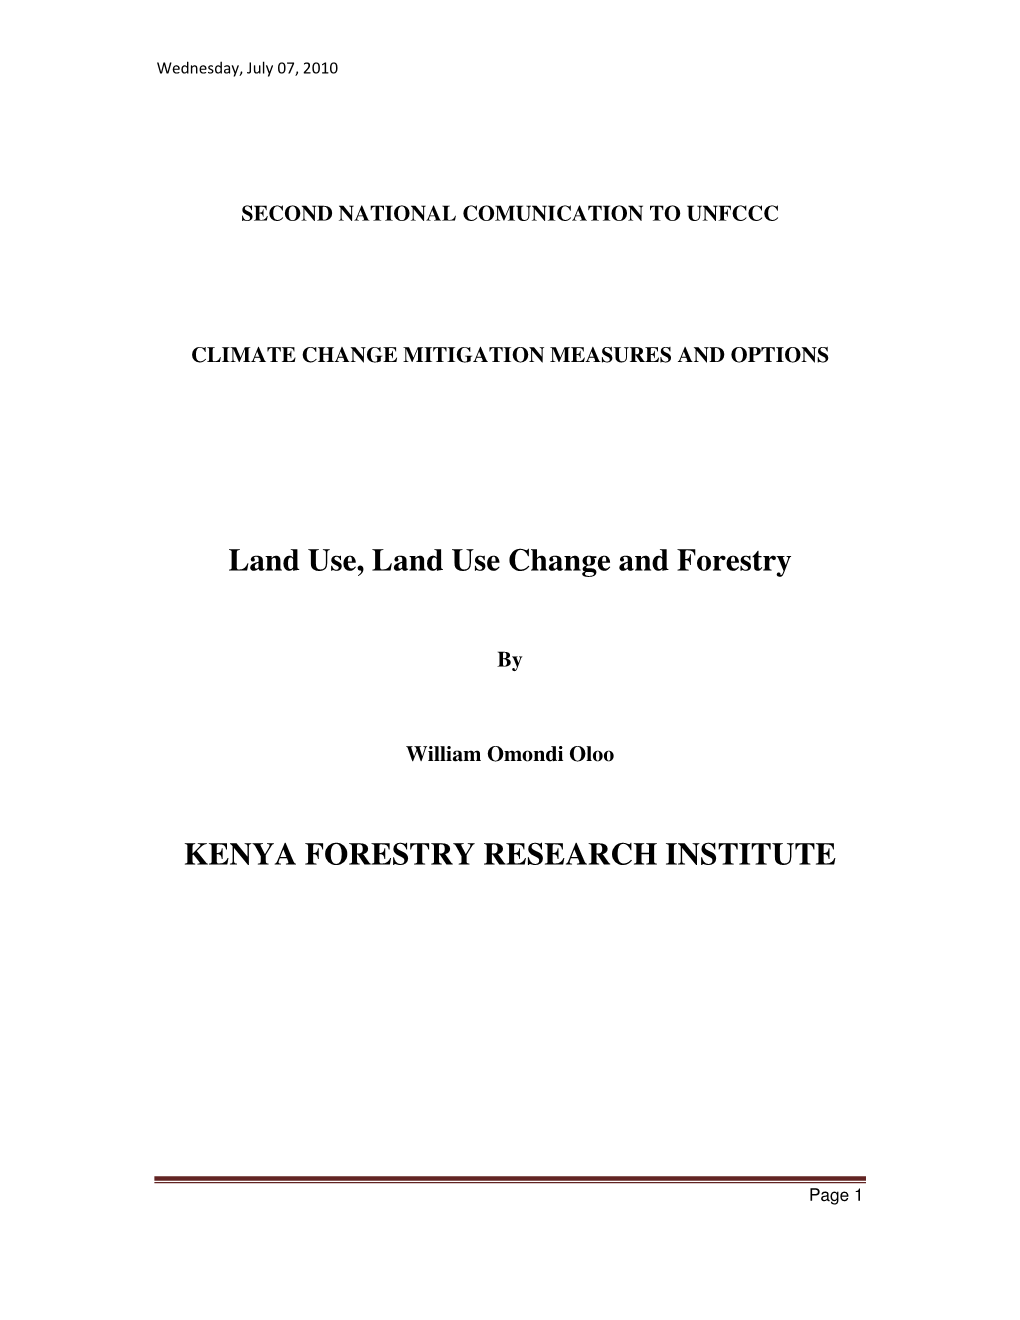 Land Use Change and Climate.Pdf